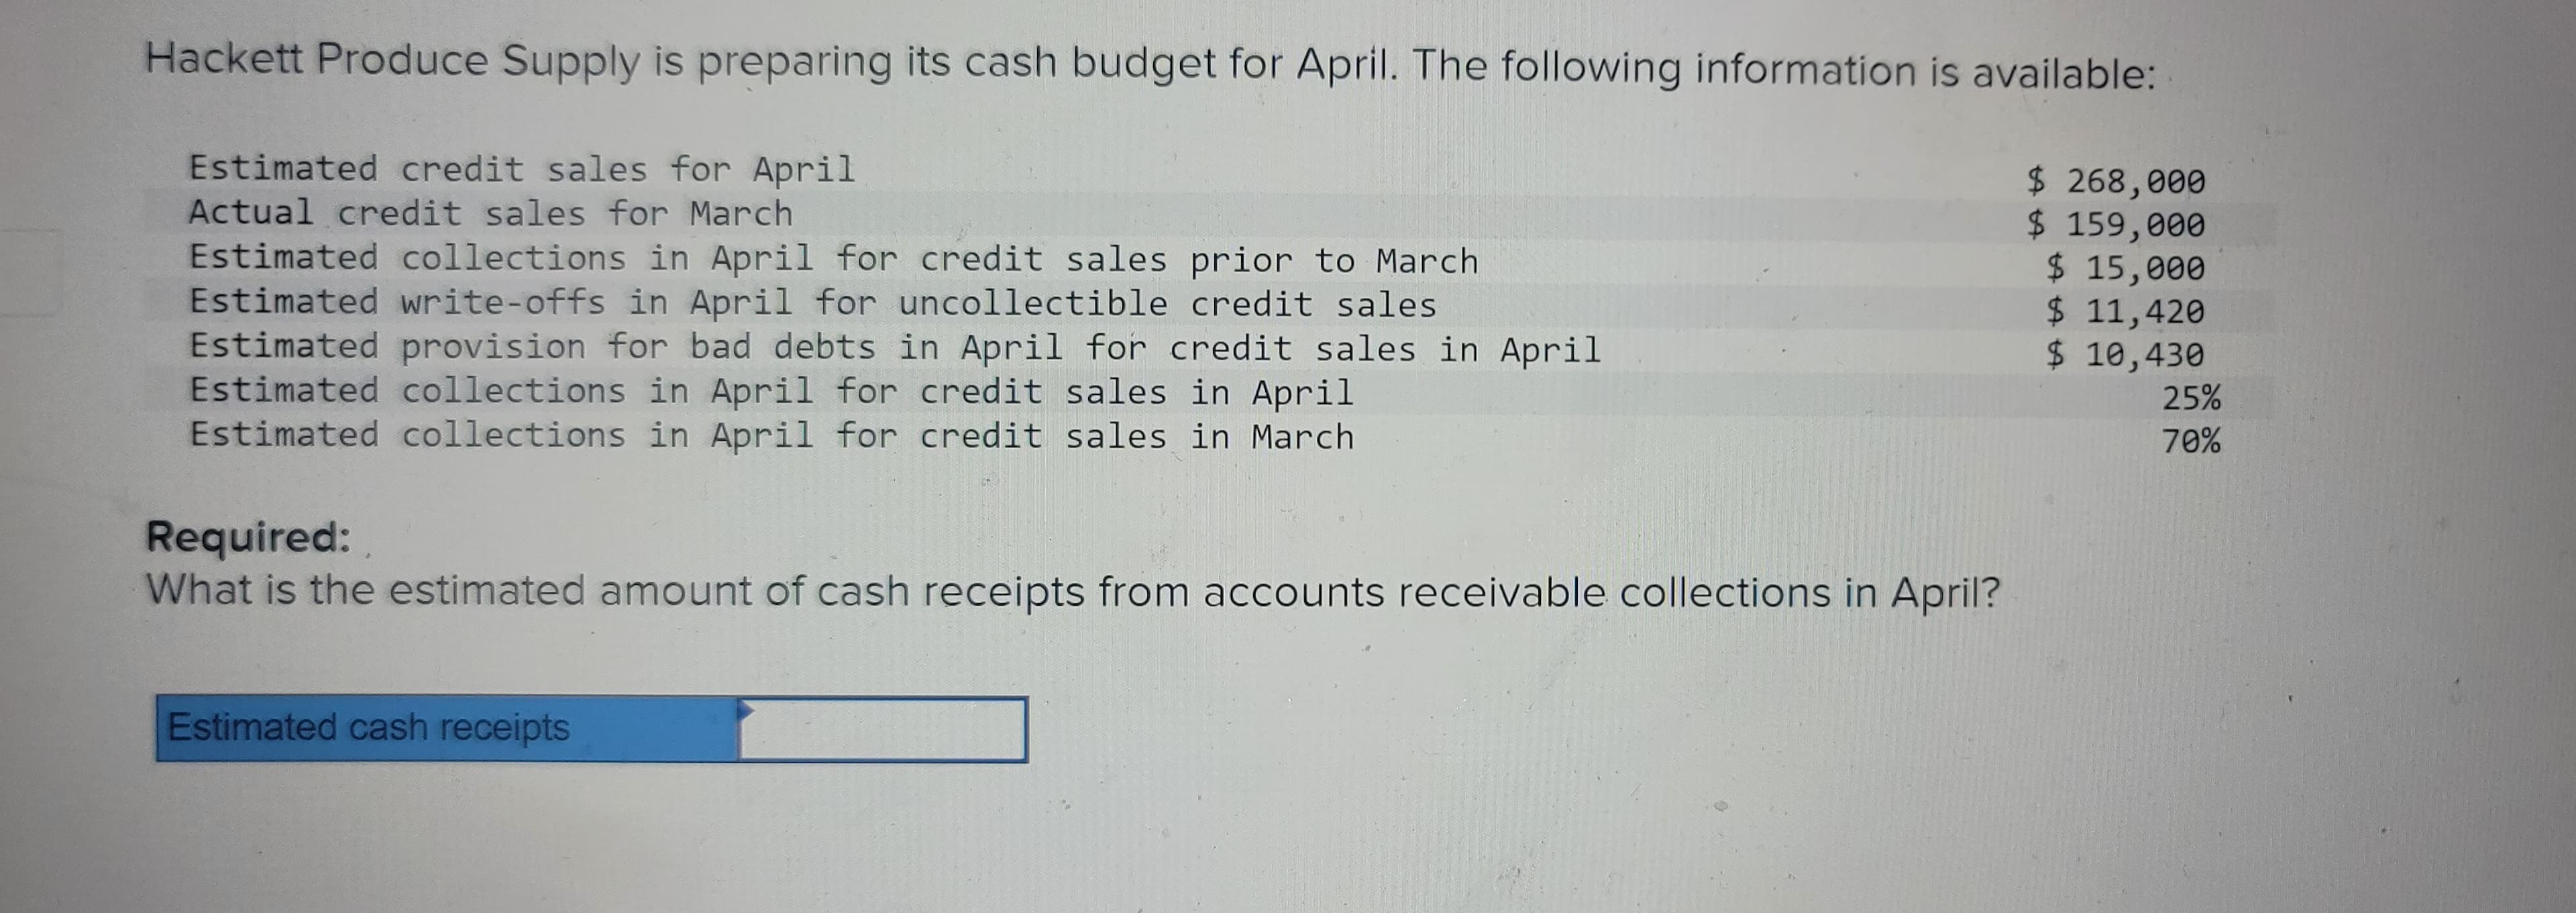 Hackett Produce Supply is preparing its cash budget for April. The following information is available:
$ 268,000
$ 159,000
$ 15,000
$ 11,420
$ 10,430
Estimated credit sales for April
Actual credit sales for March
Estimated collections in April for credit sales prior to March
Estimated write-offs in April for uncollectible credit sales
Estimated provision for bad debts in April for credit sales in April
Estimated collections in April for credit sales in April
Estimated collections in April for credit sales in March
Required:
What is the estimated amount of cash receipts from accounts receivable collections in April?
Estimated cash receipts
25%
70%